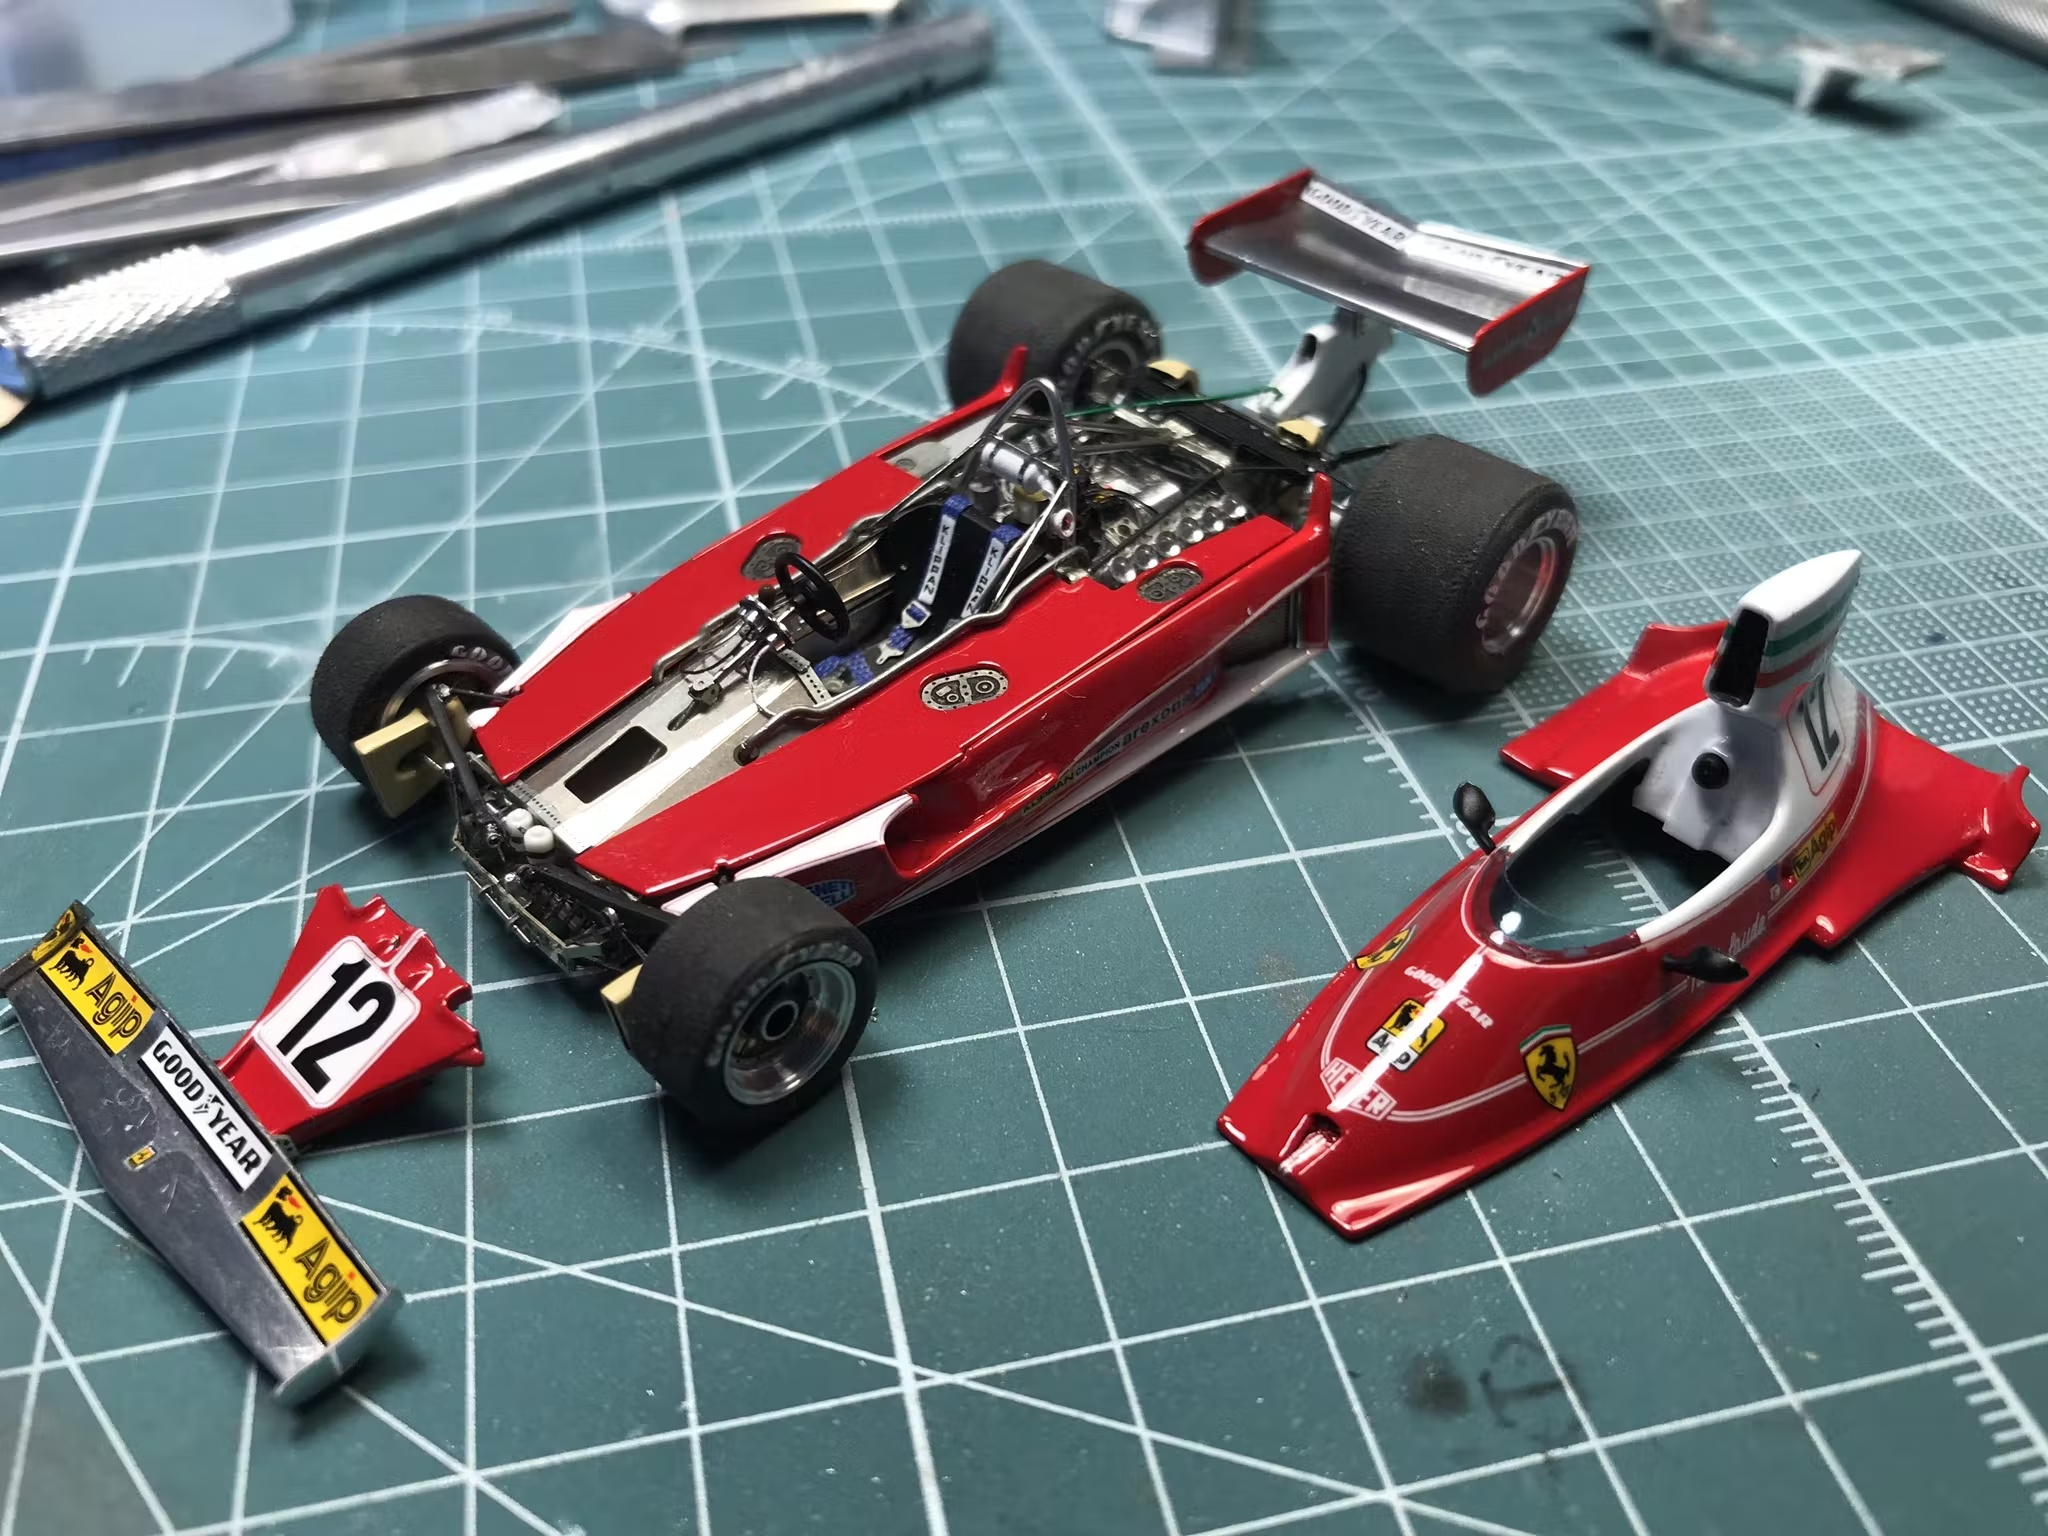 Hard Craft: For 40 years, Tameo Kits has made F1 in miniature